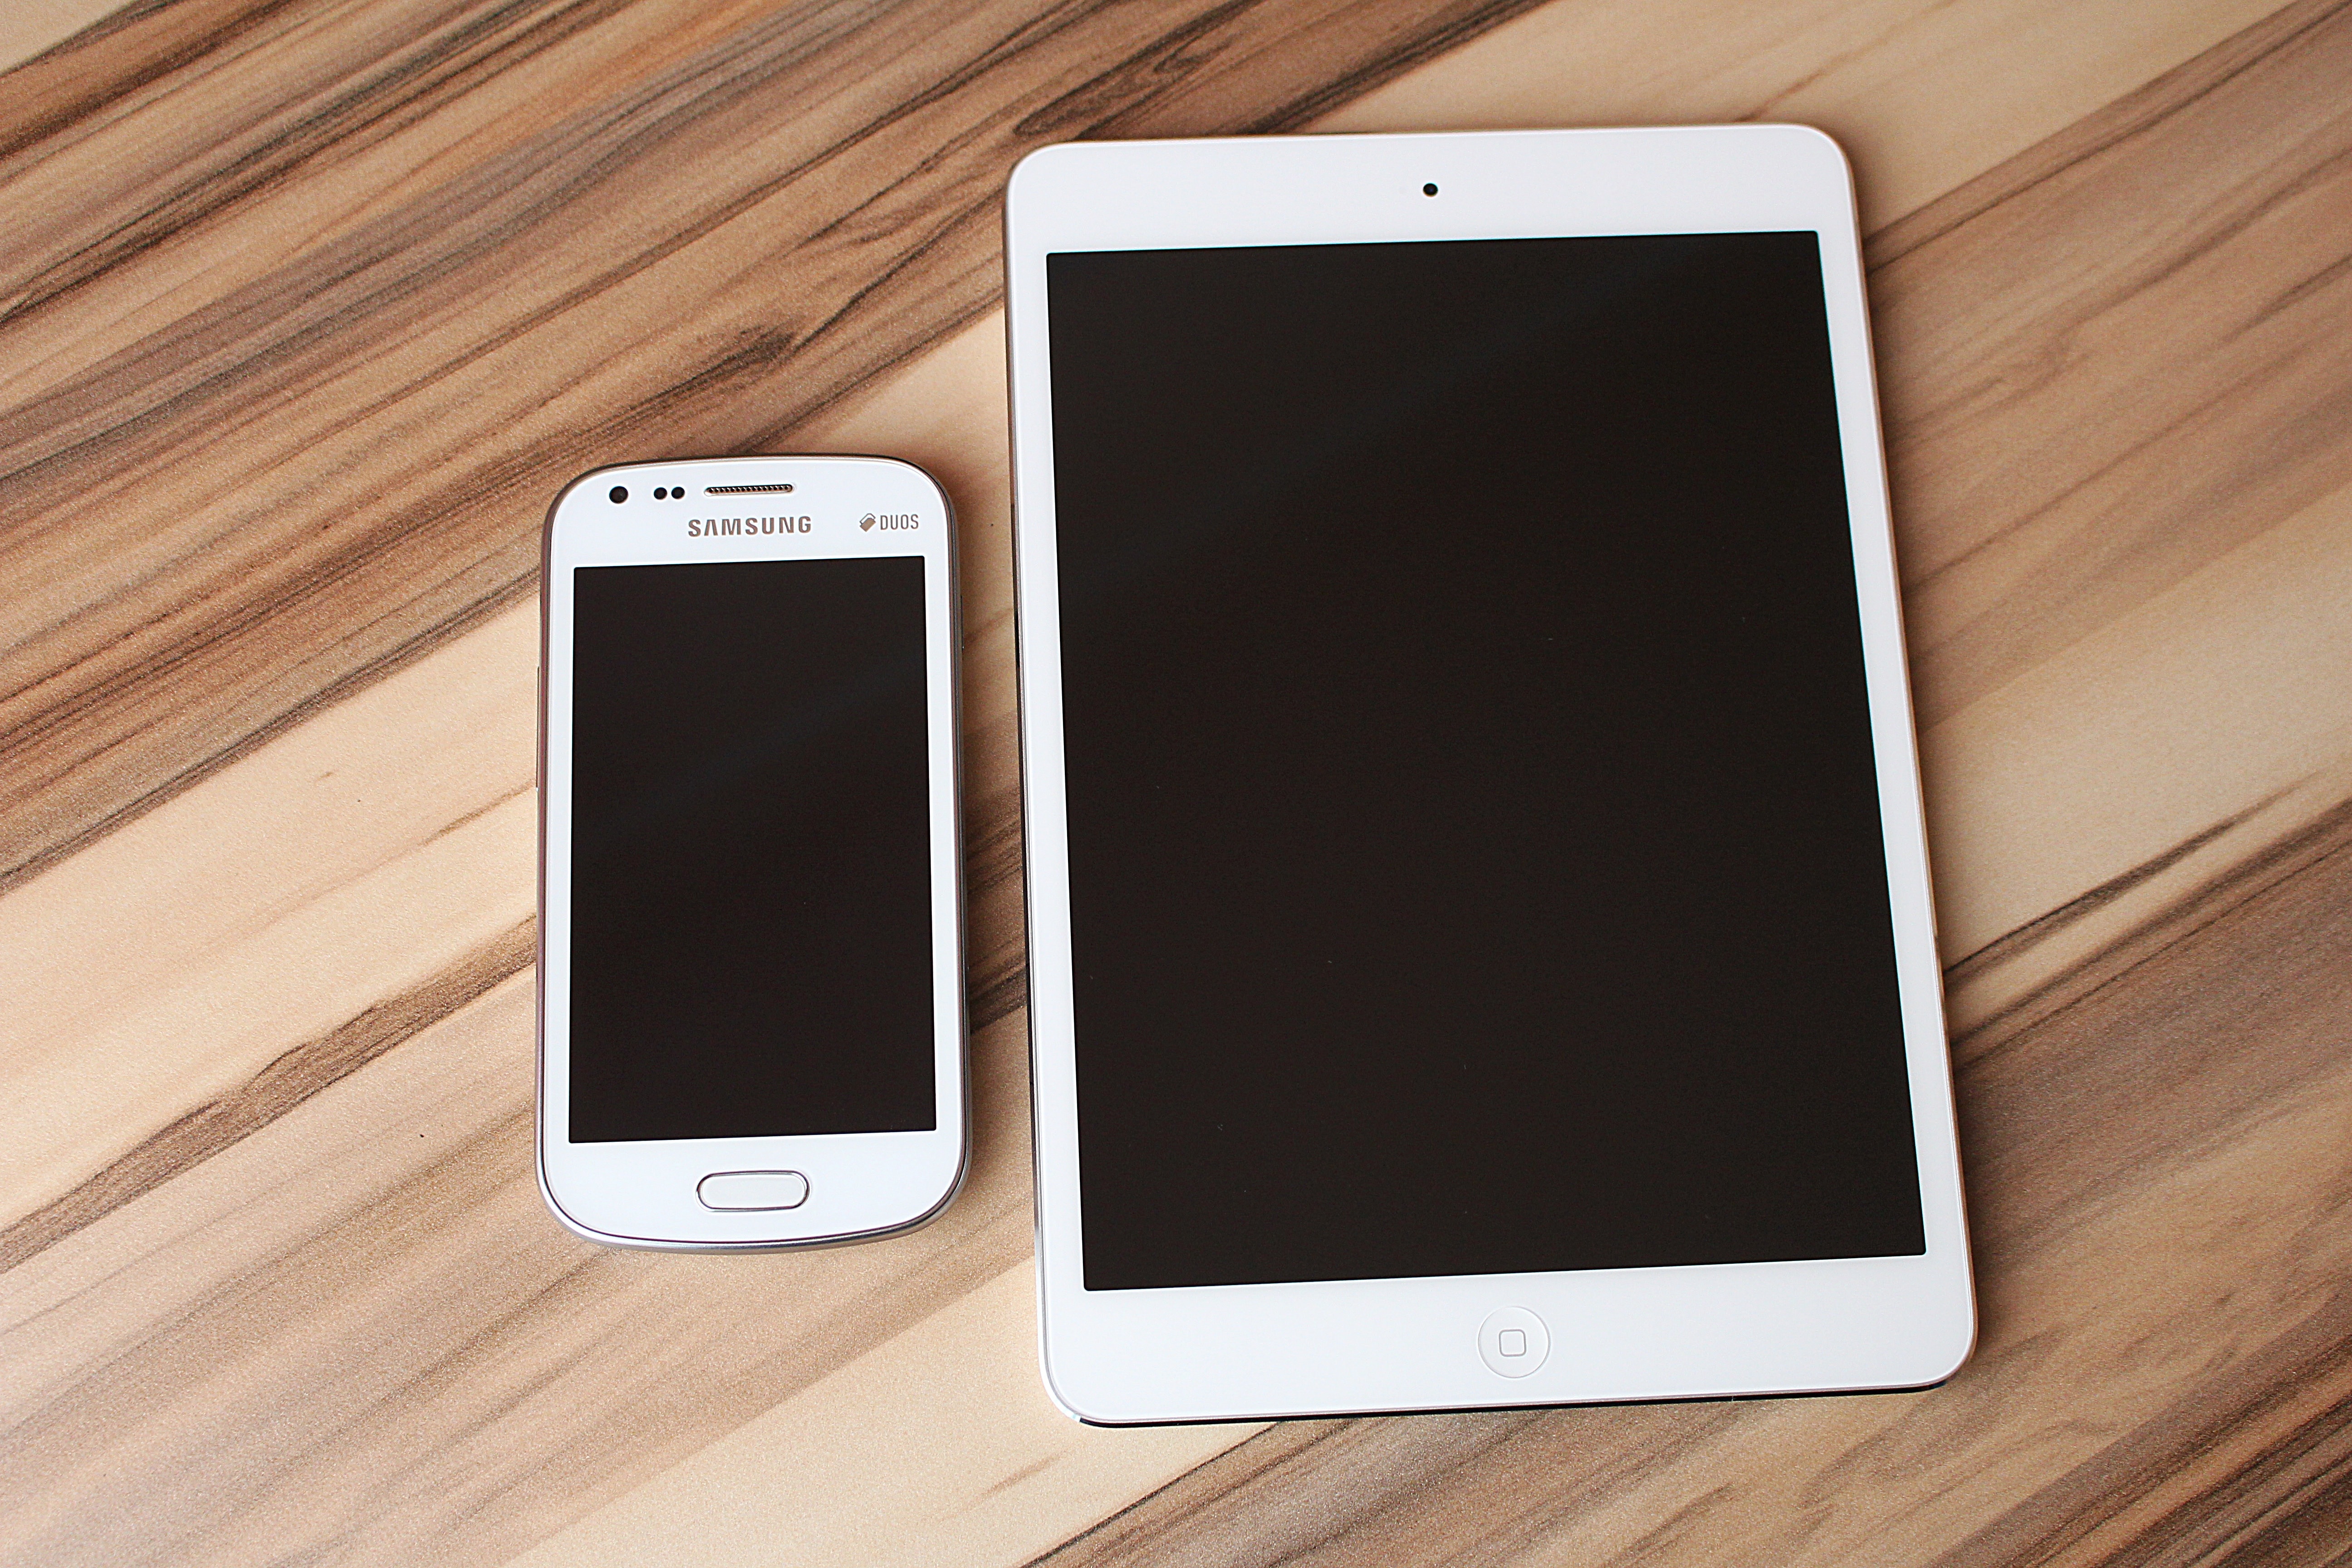 white samsung duos android smartphone and white ipad